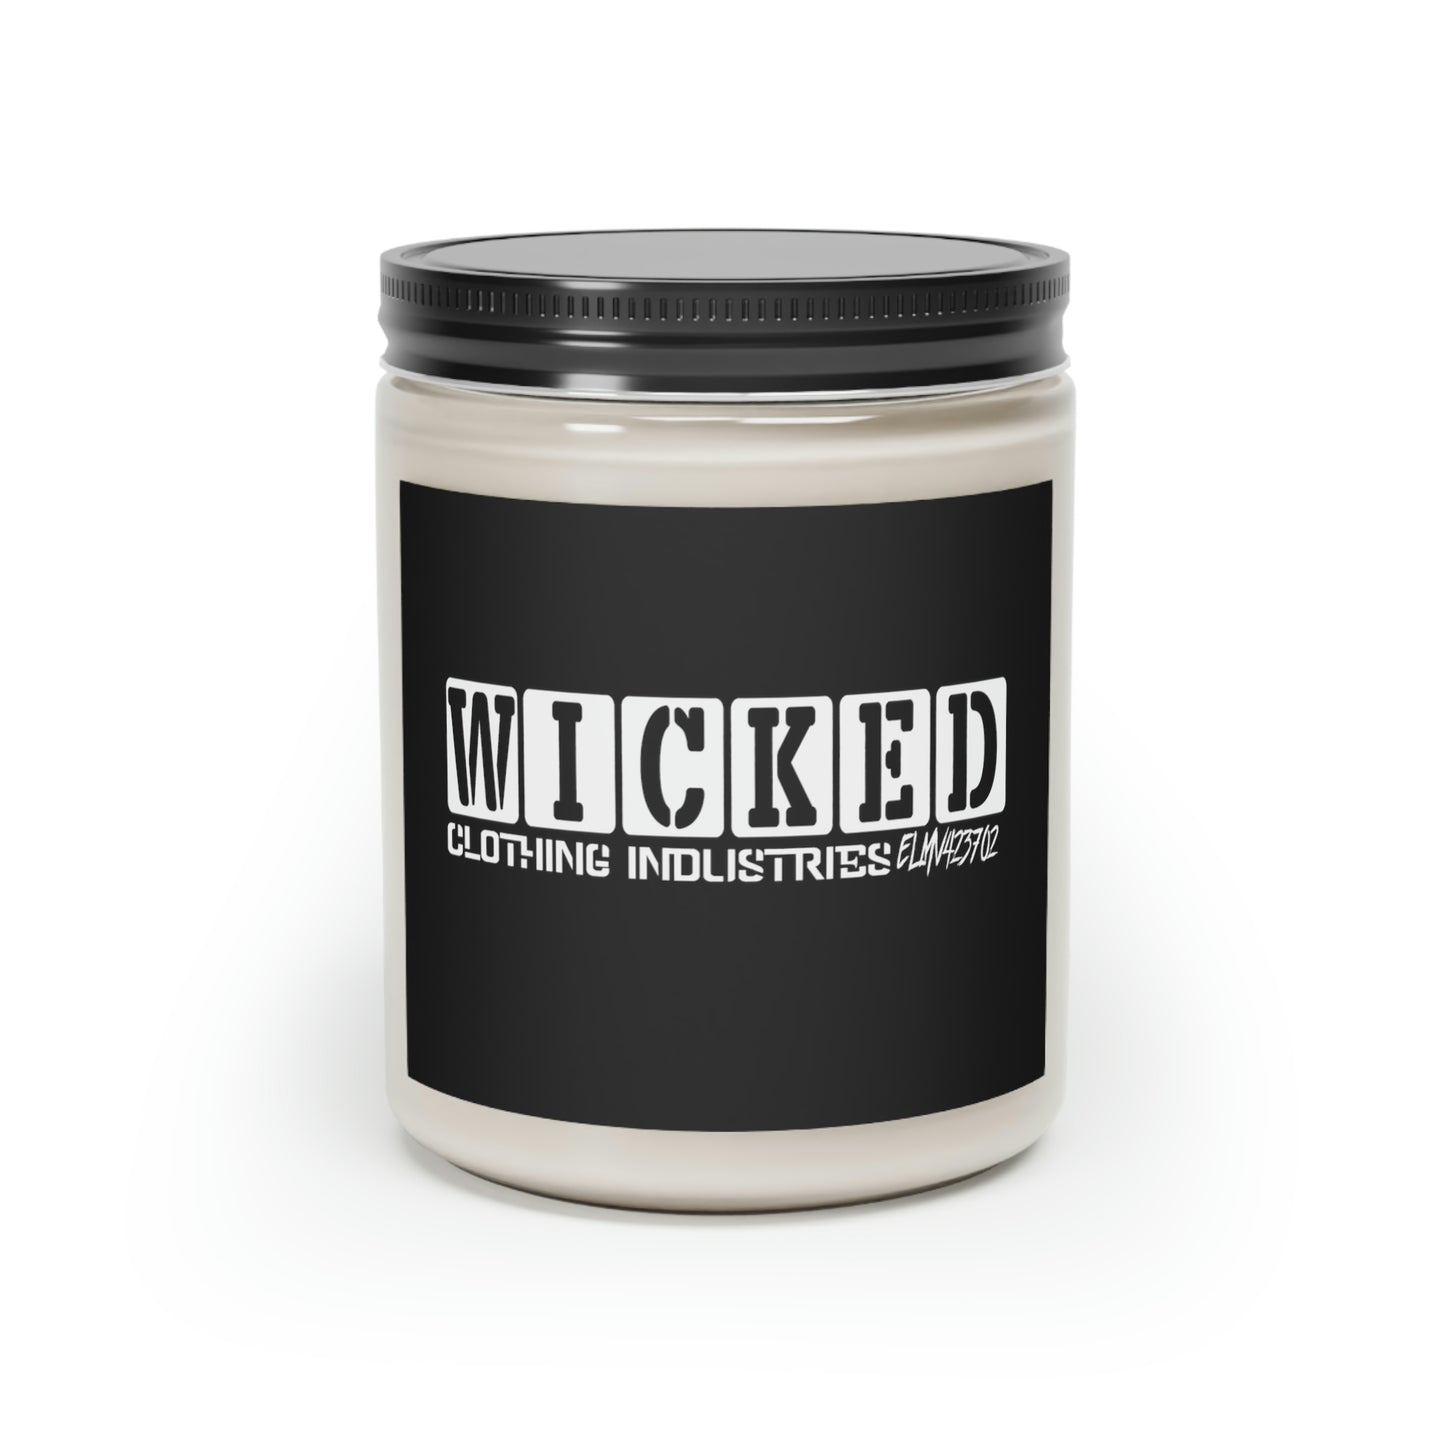 Wicked ELMV423702 Scented Candle, 9oz